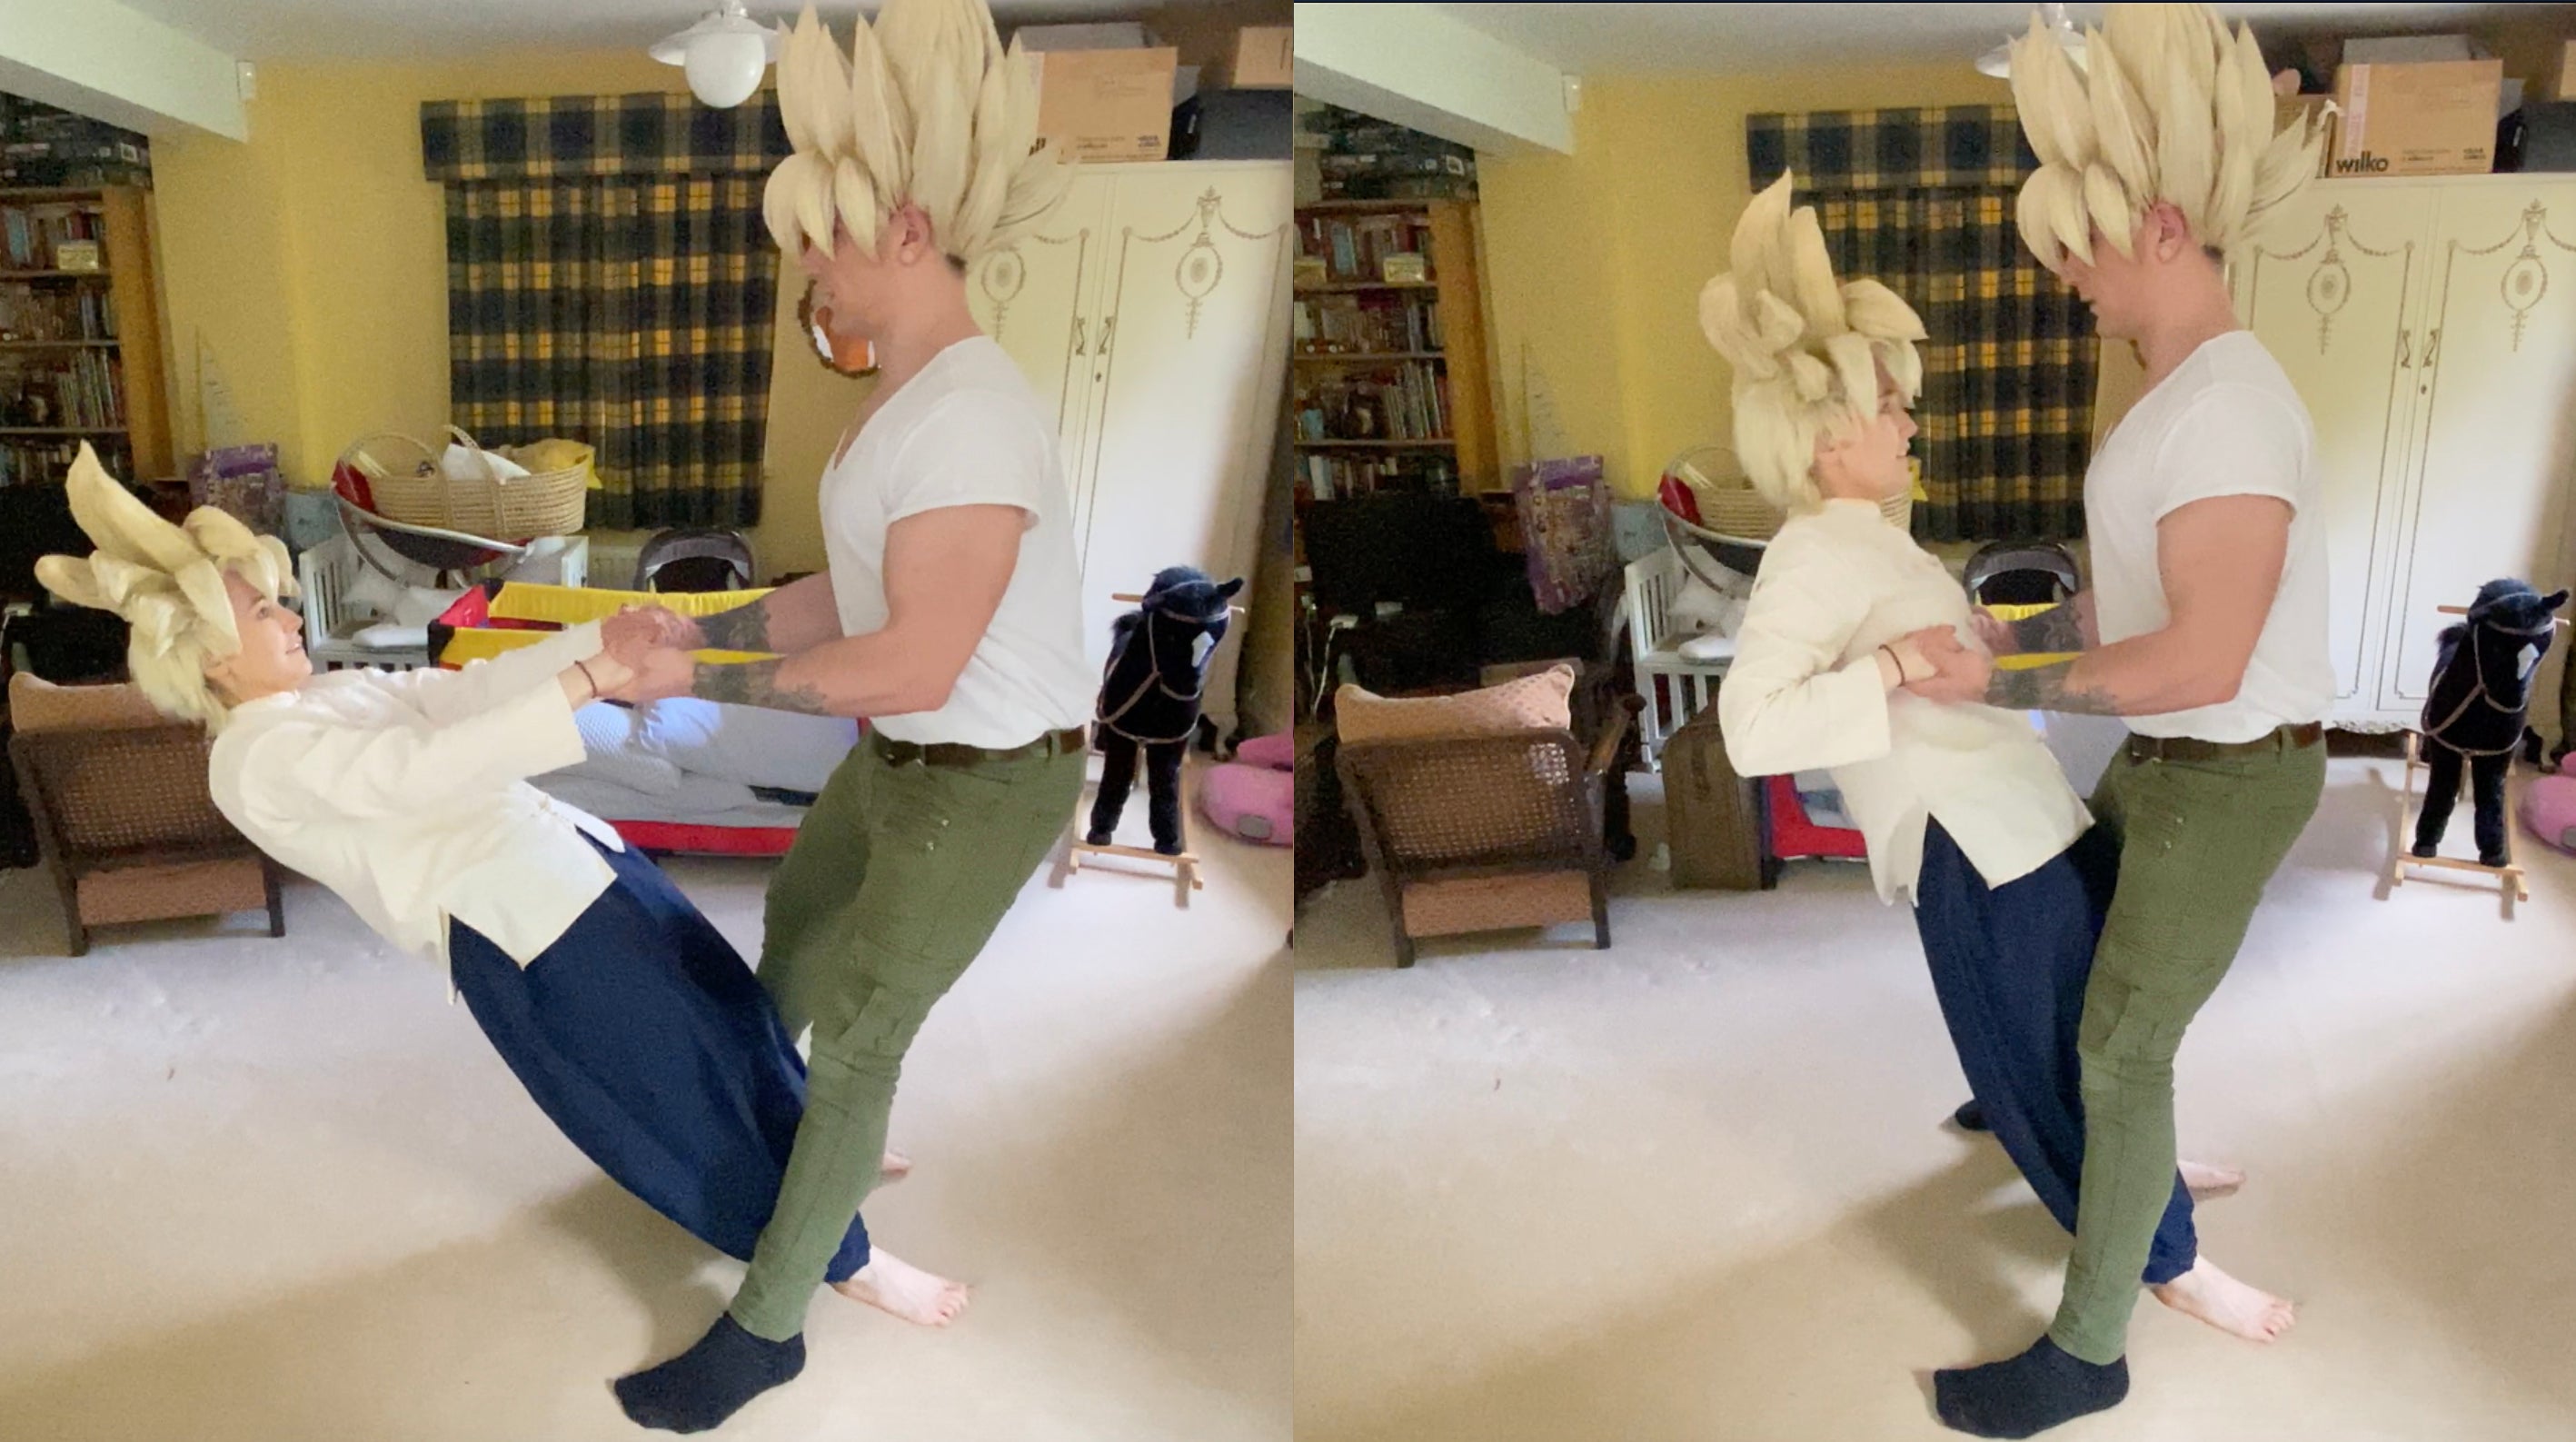 Goku and Gohan explain the 2 person inverted row with cosplay fitness 